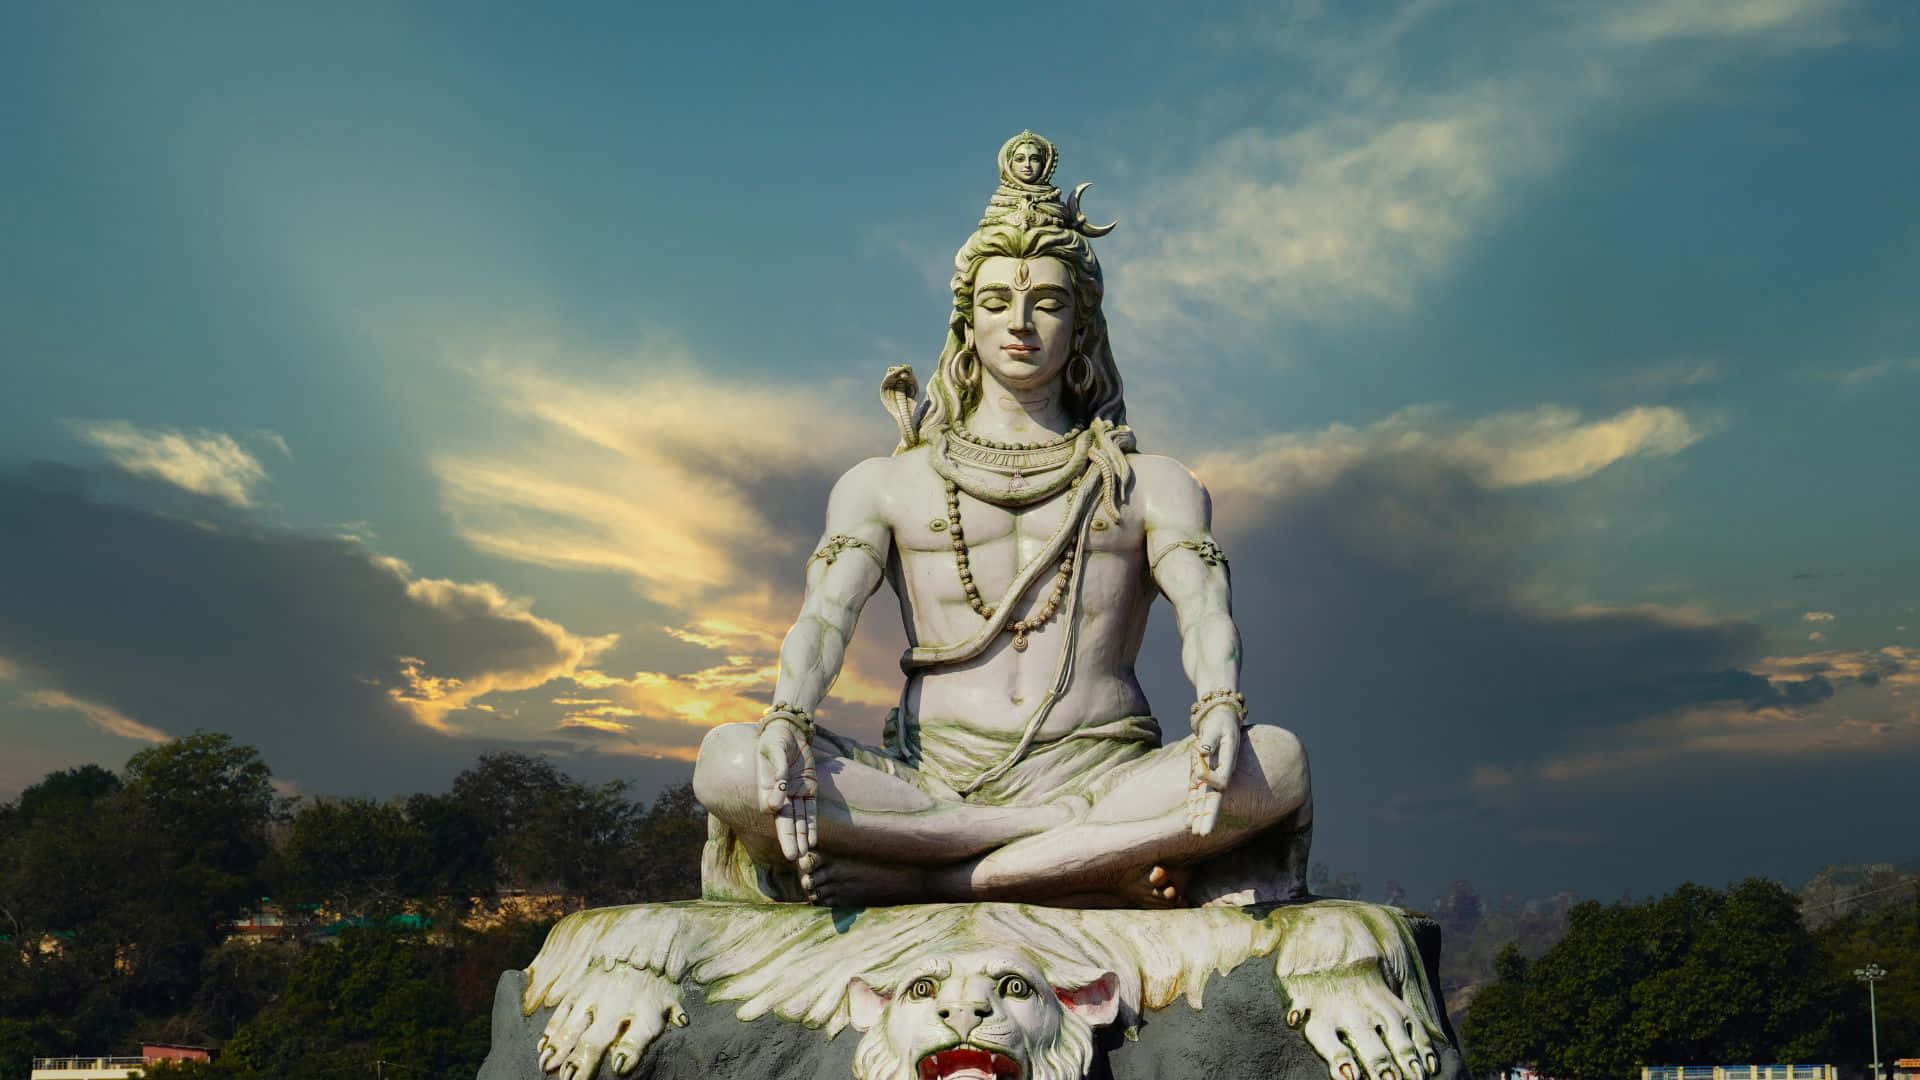 Lord Shiva, the destroyer in Hinduism